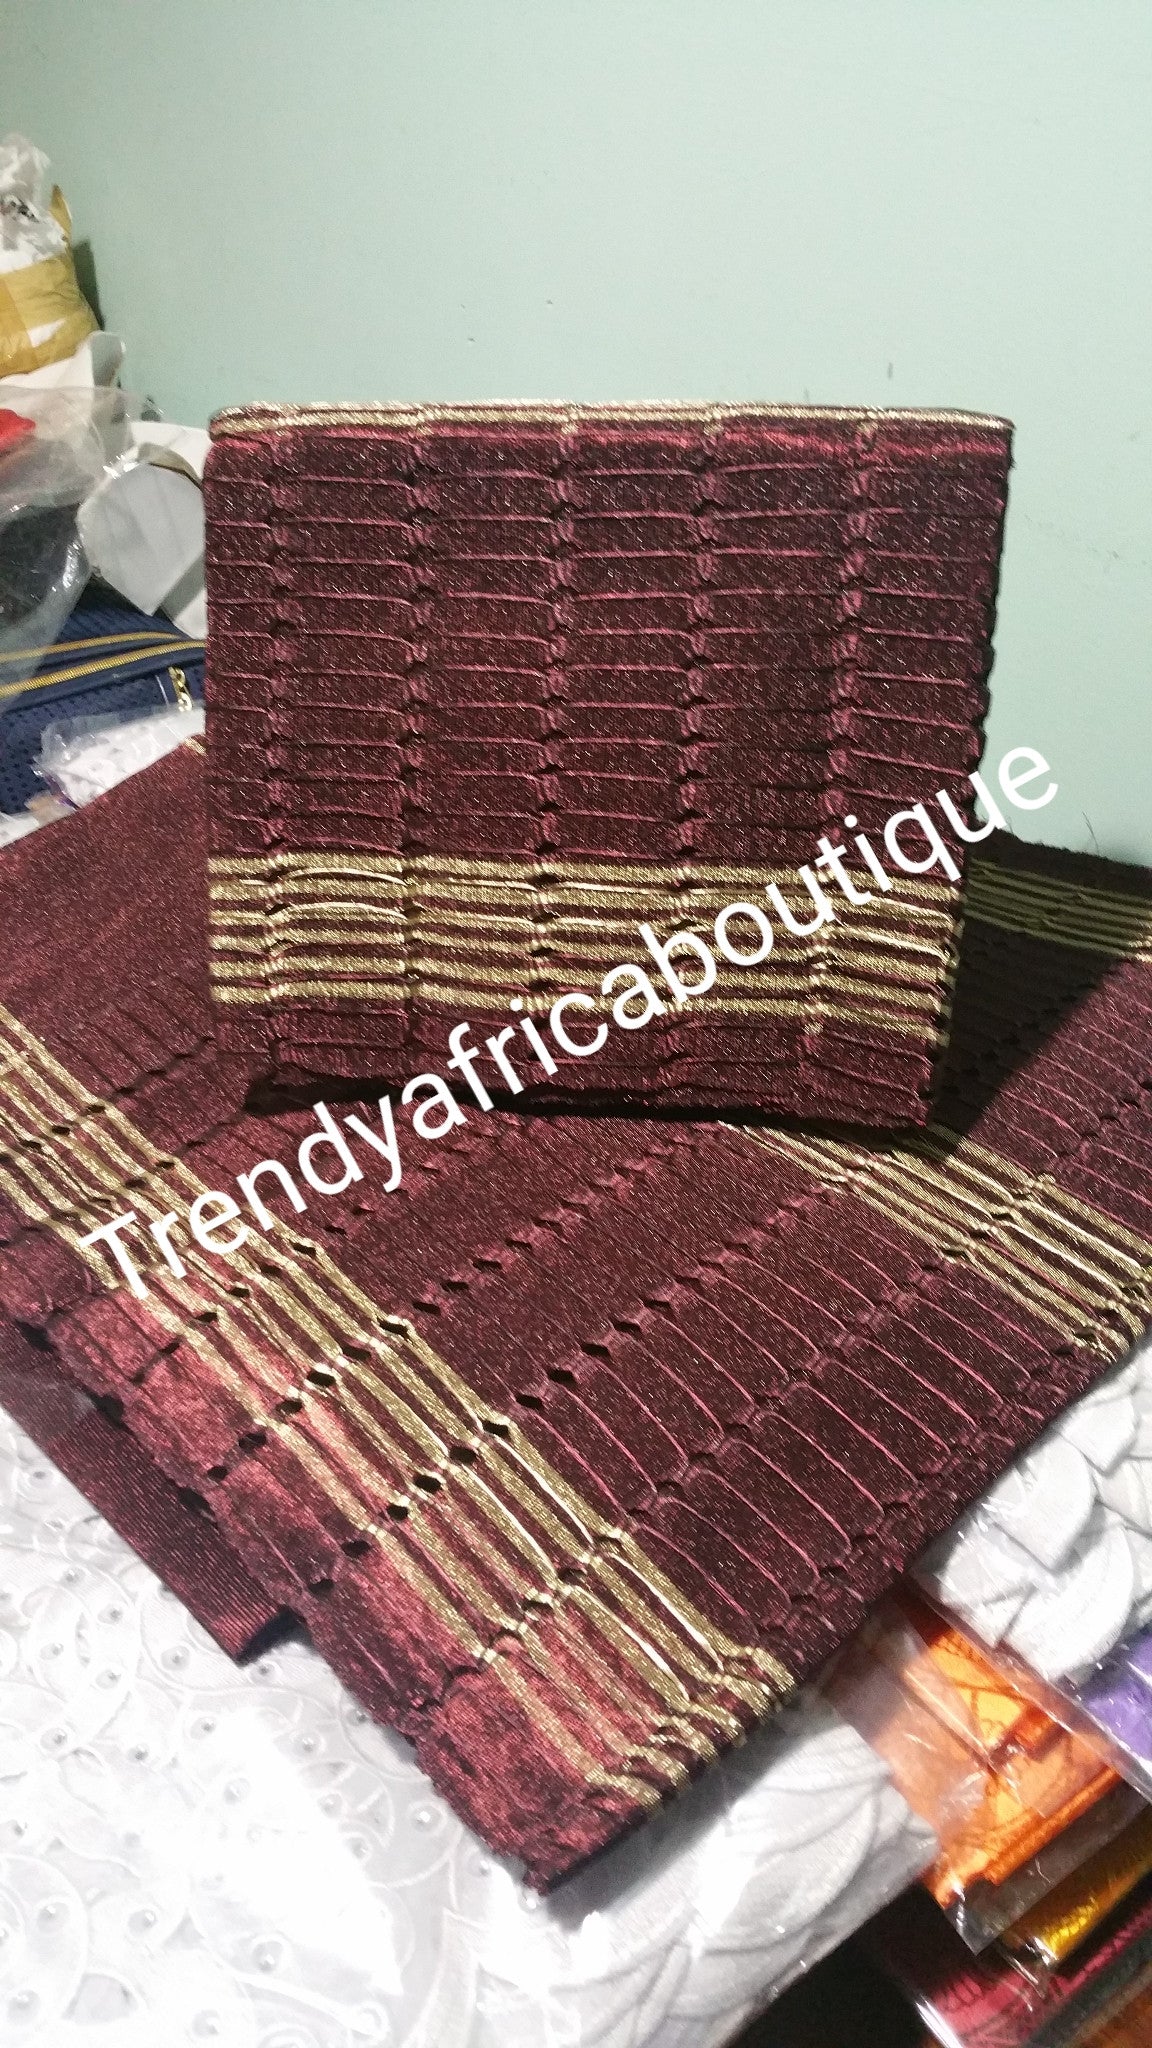 Chocolate/gold 3pcs set Nigerian traditional aso-oke gele set for Nigerian weddings/party. Sold as a set of for $110. Hot sale. Original quality from motherland